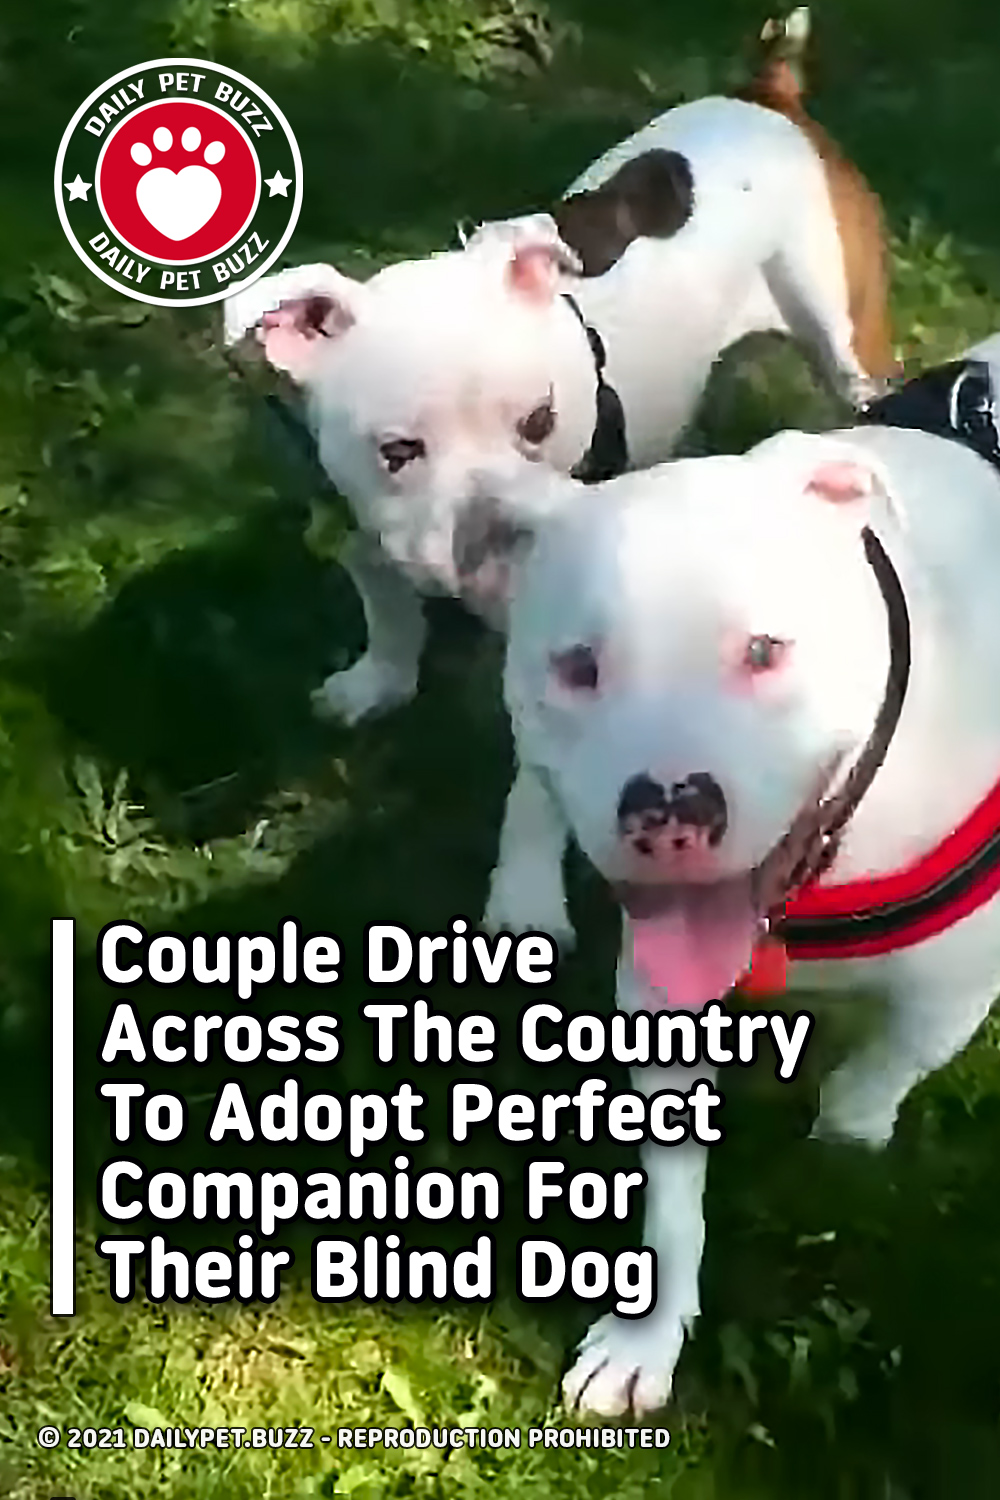 Couple Drives Across The Country To Adopt Perfect Companion For Their Blind Dog